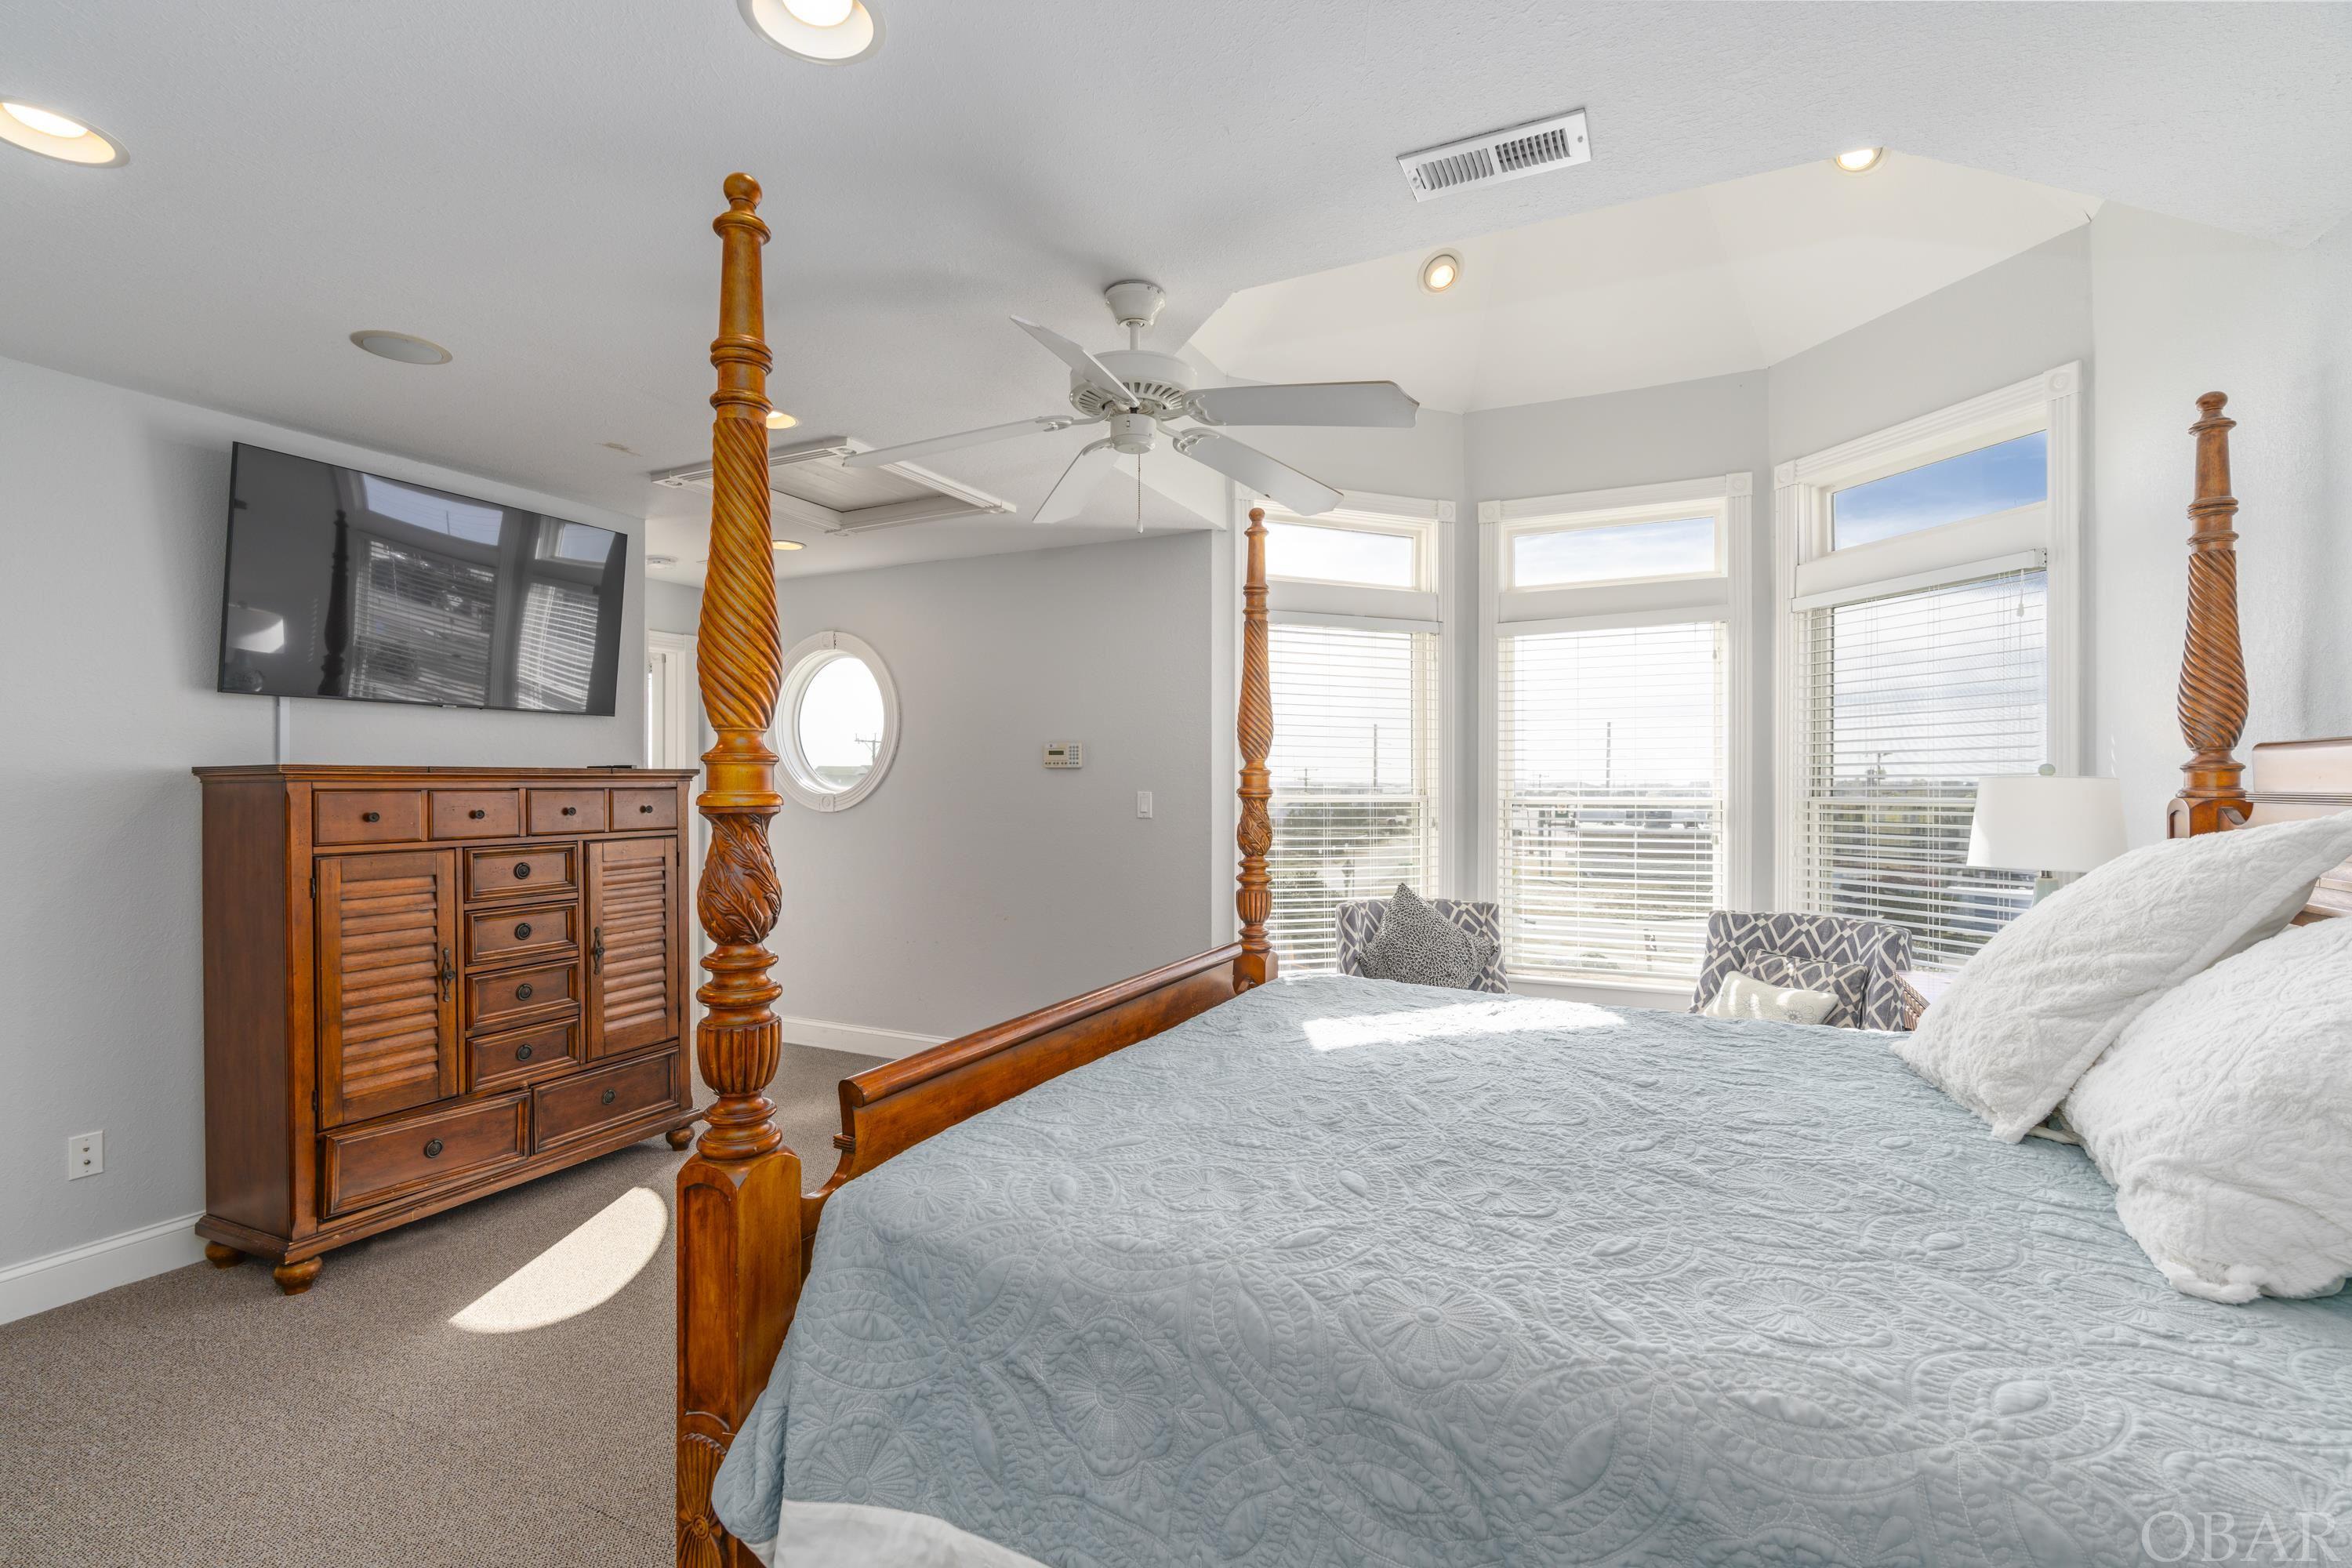 7245 Old Oregon Inlet Road, Nags Head, NC 27959, 8 Bedrooms Bedrooms, ,9 BathroomsBathrooms,Residential,For sale,Old Oregon Inlet Road,124781